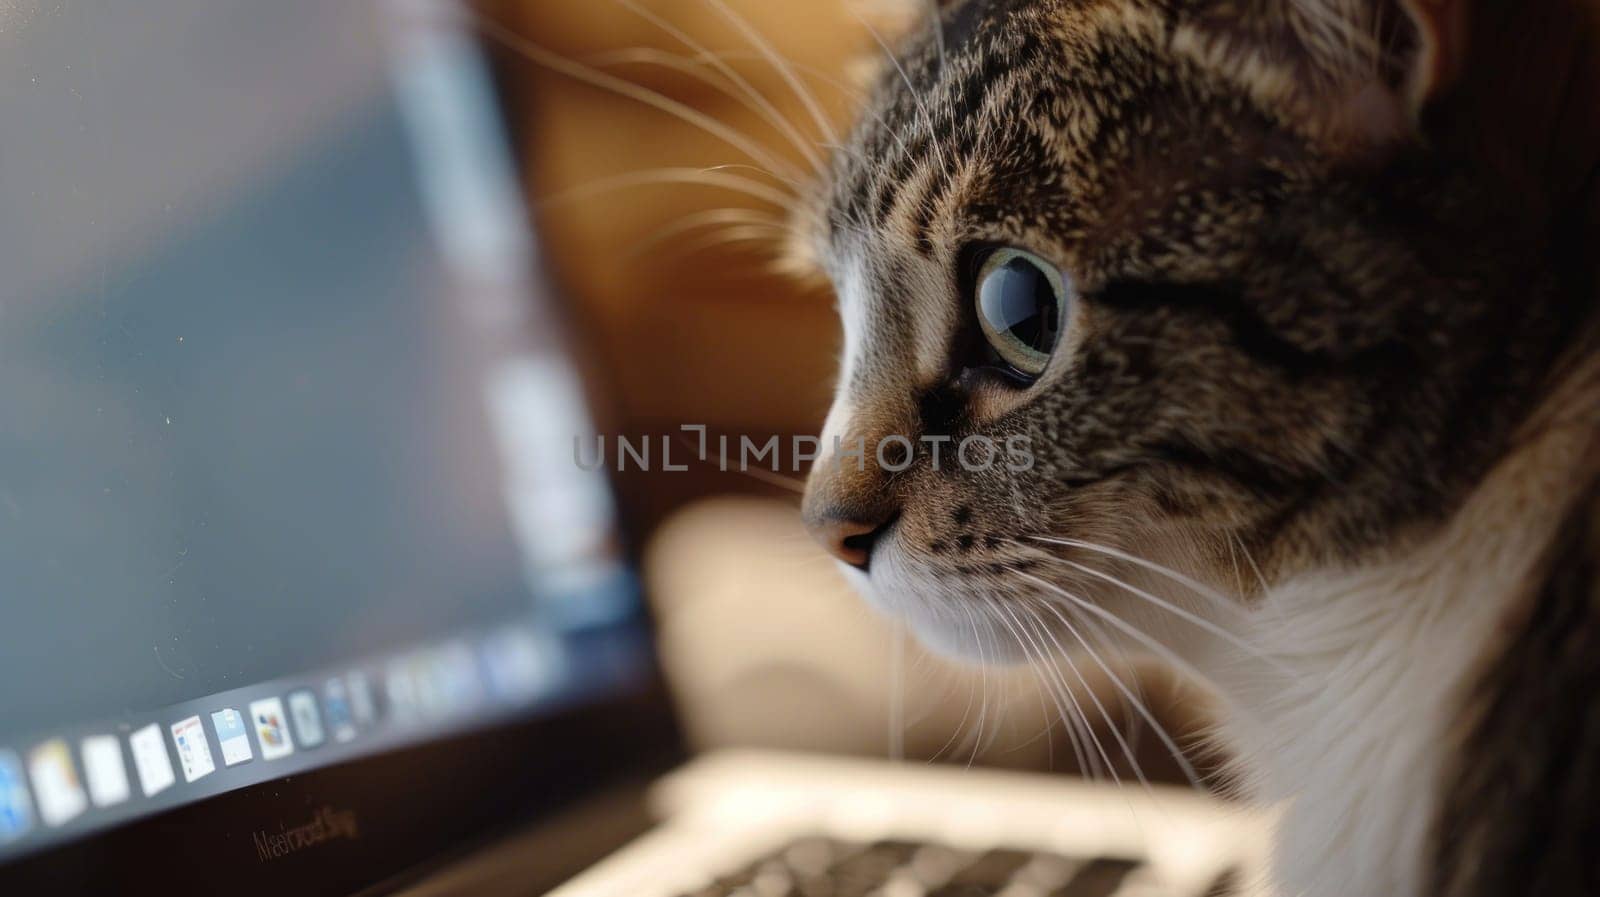 A cat is looking at a computer screen. The cat is staring at the screen with its eyes wide open